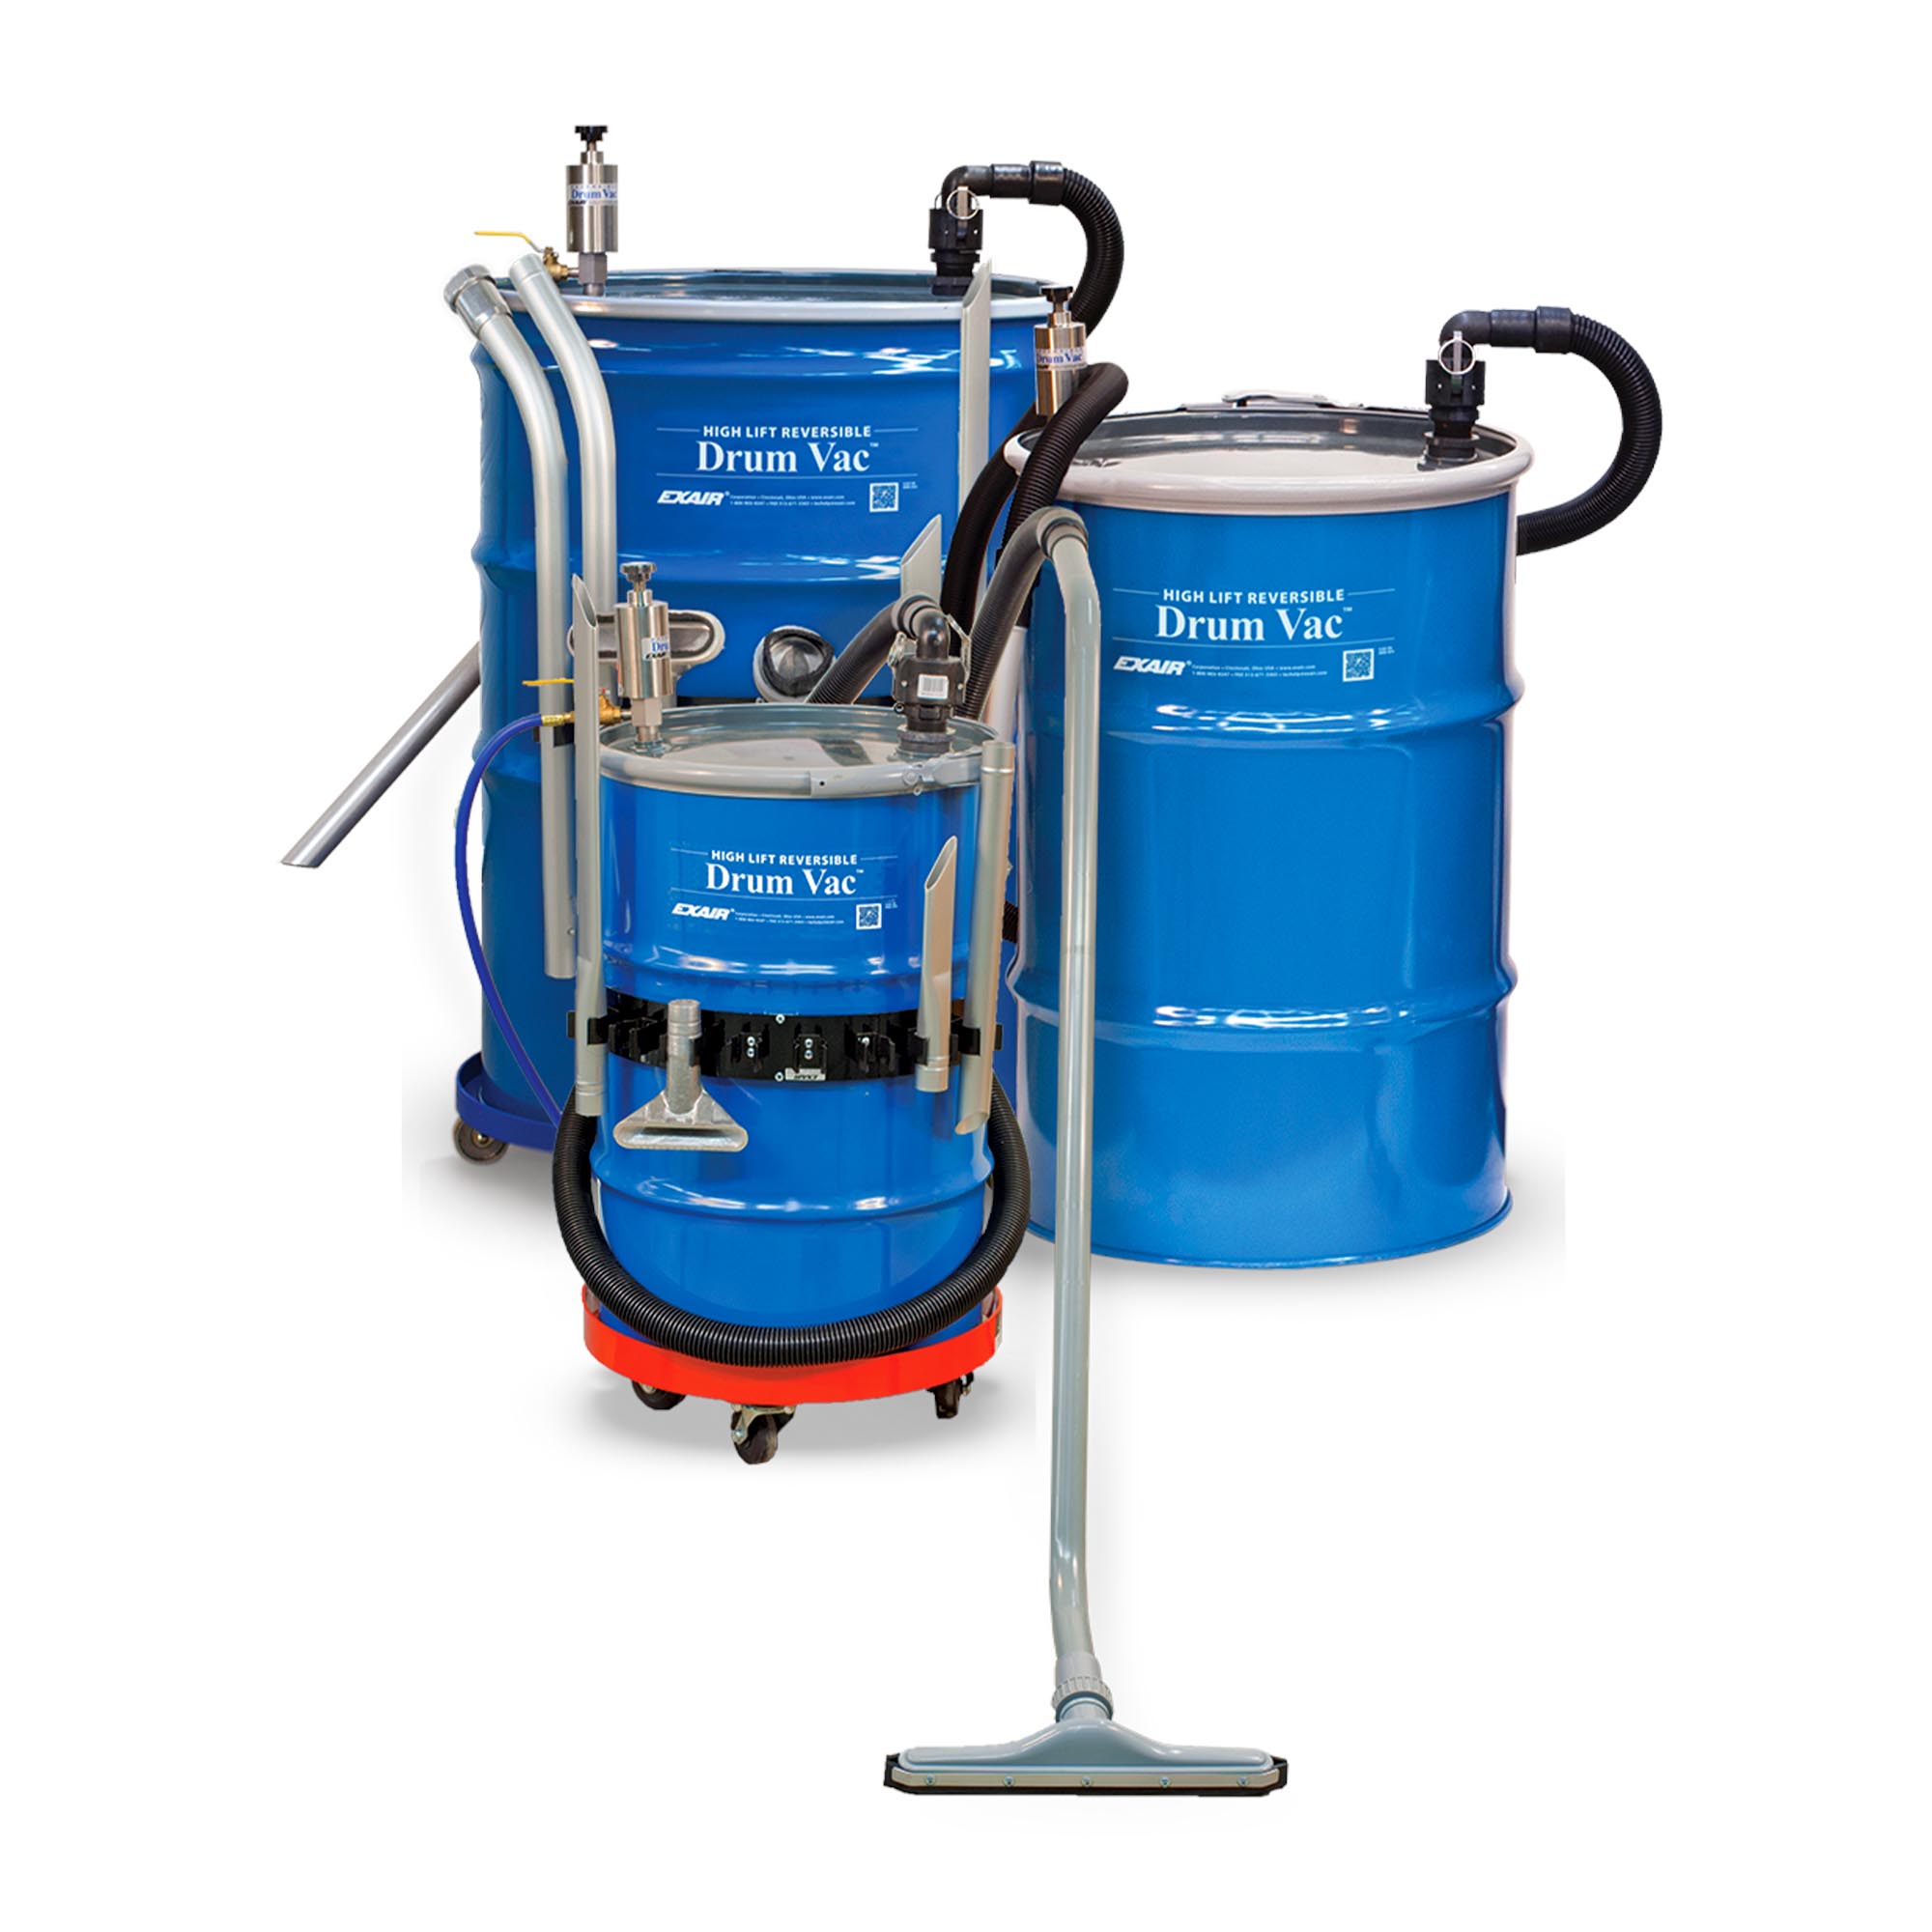 Deluxe Reversible Drum Vac System